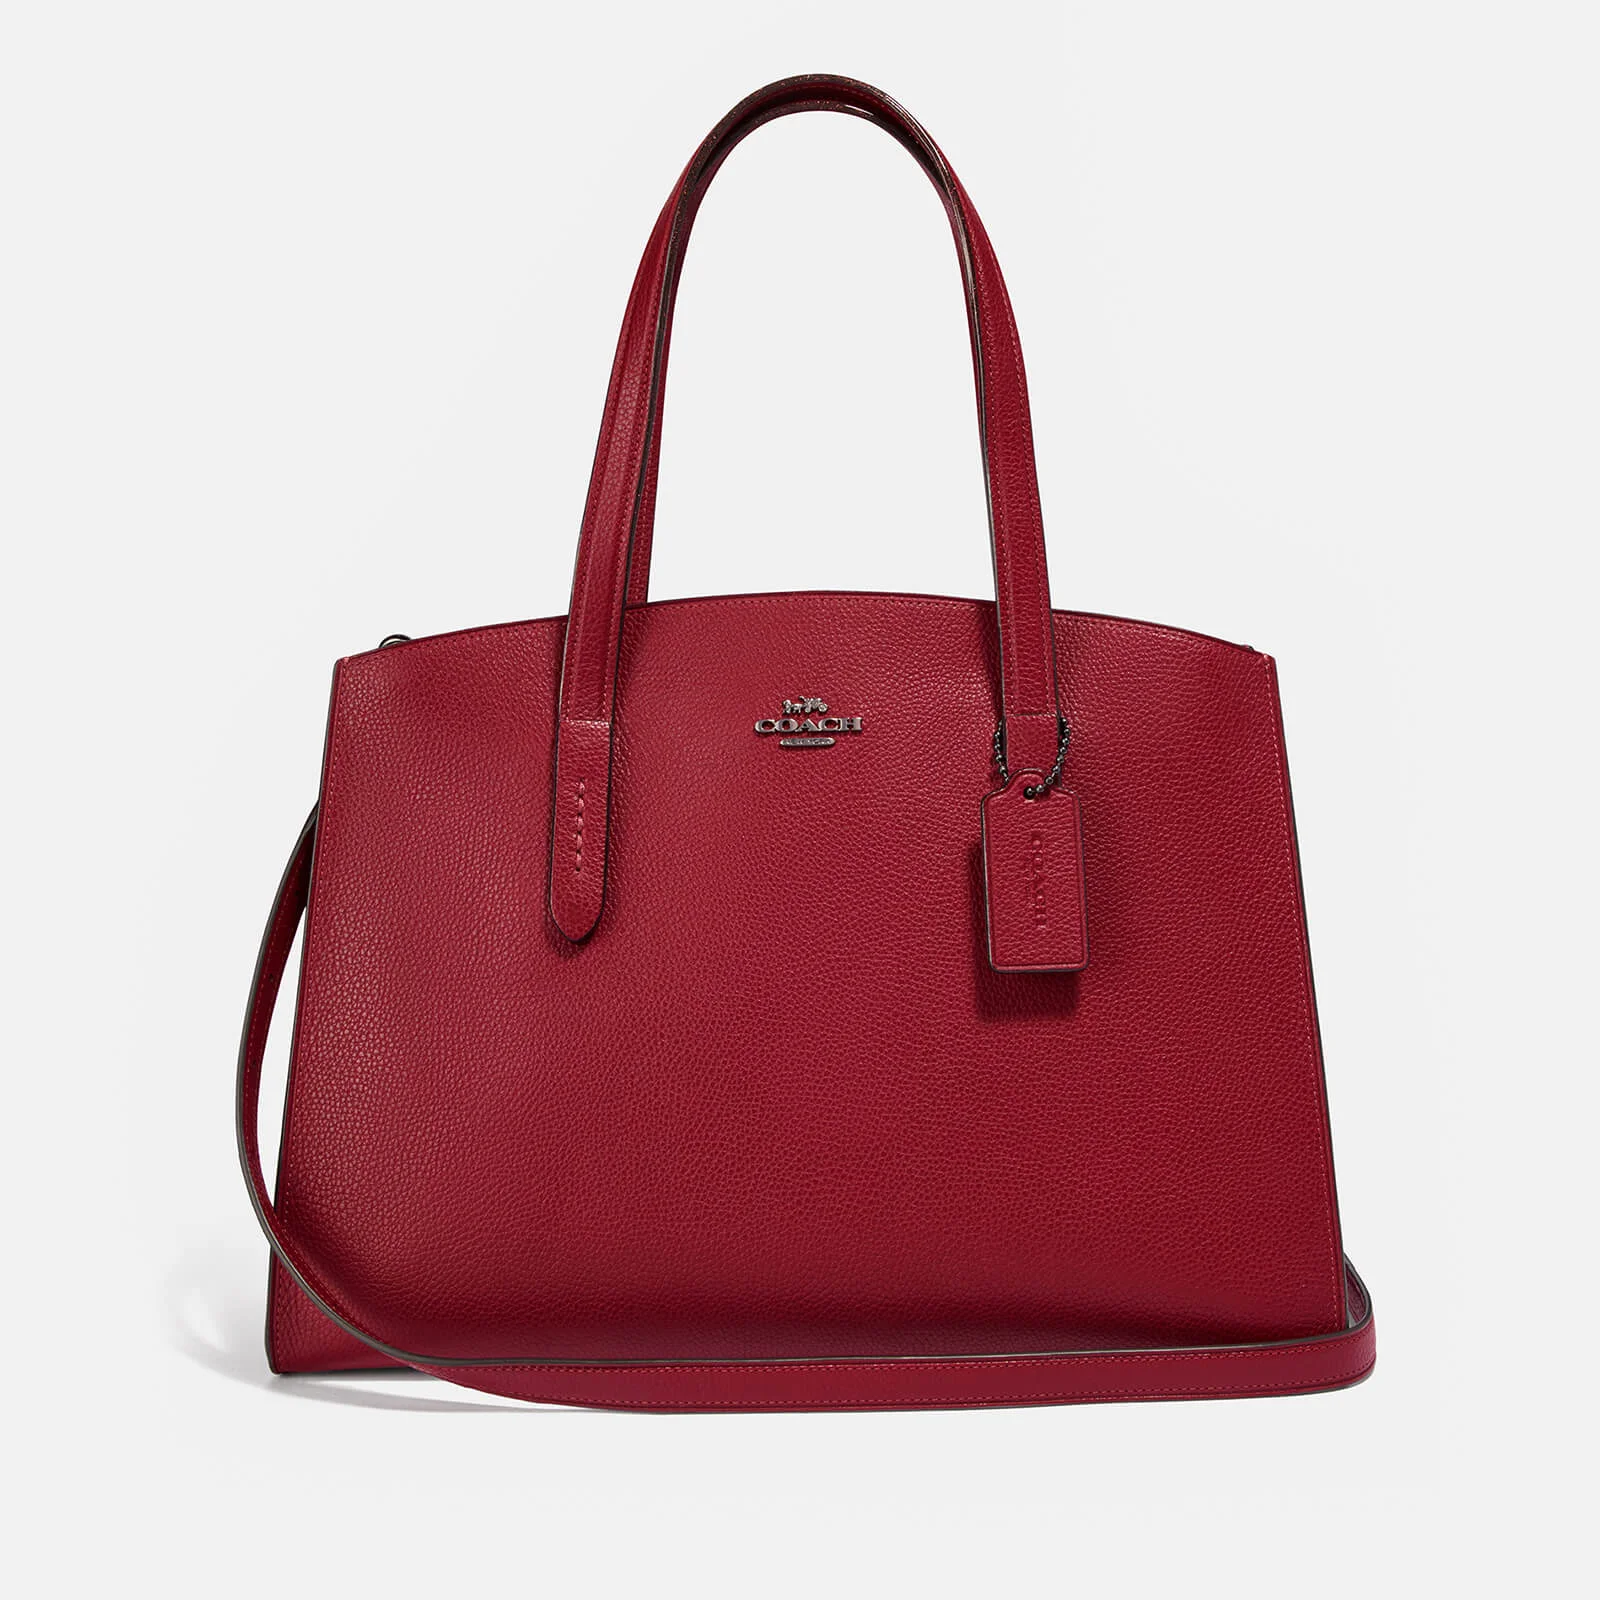 Coach Women's Charlie Carryall Bag - Deep Red Image 1